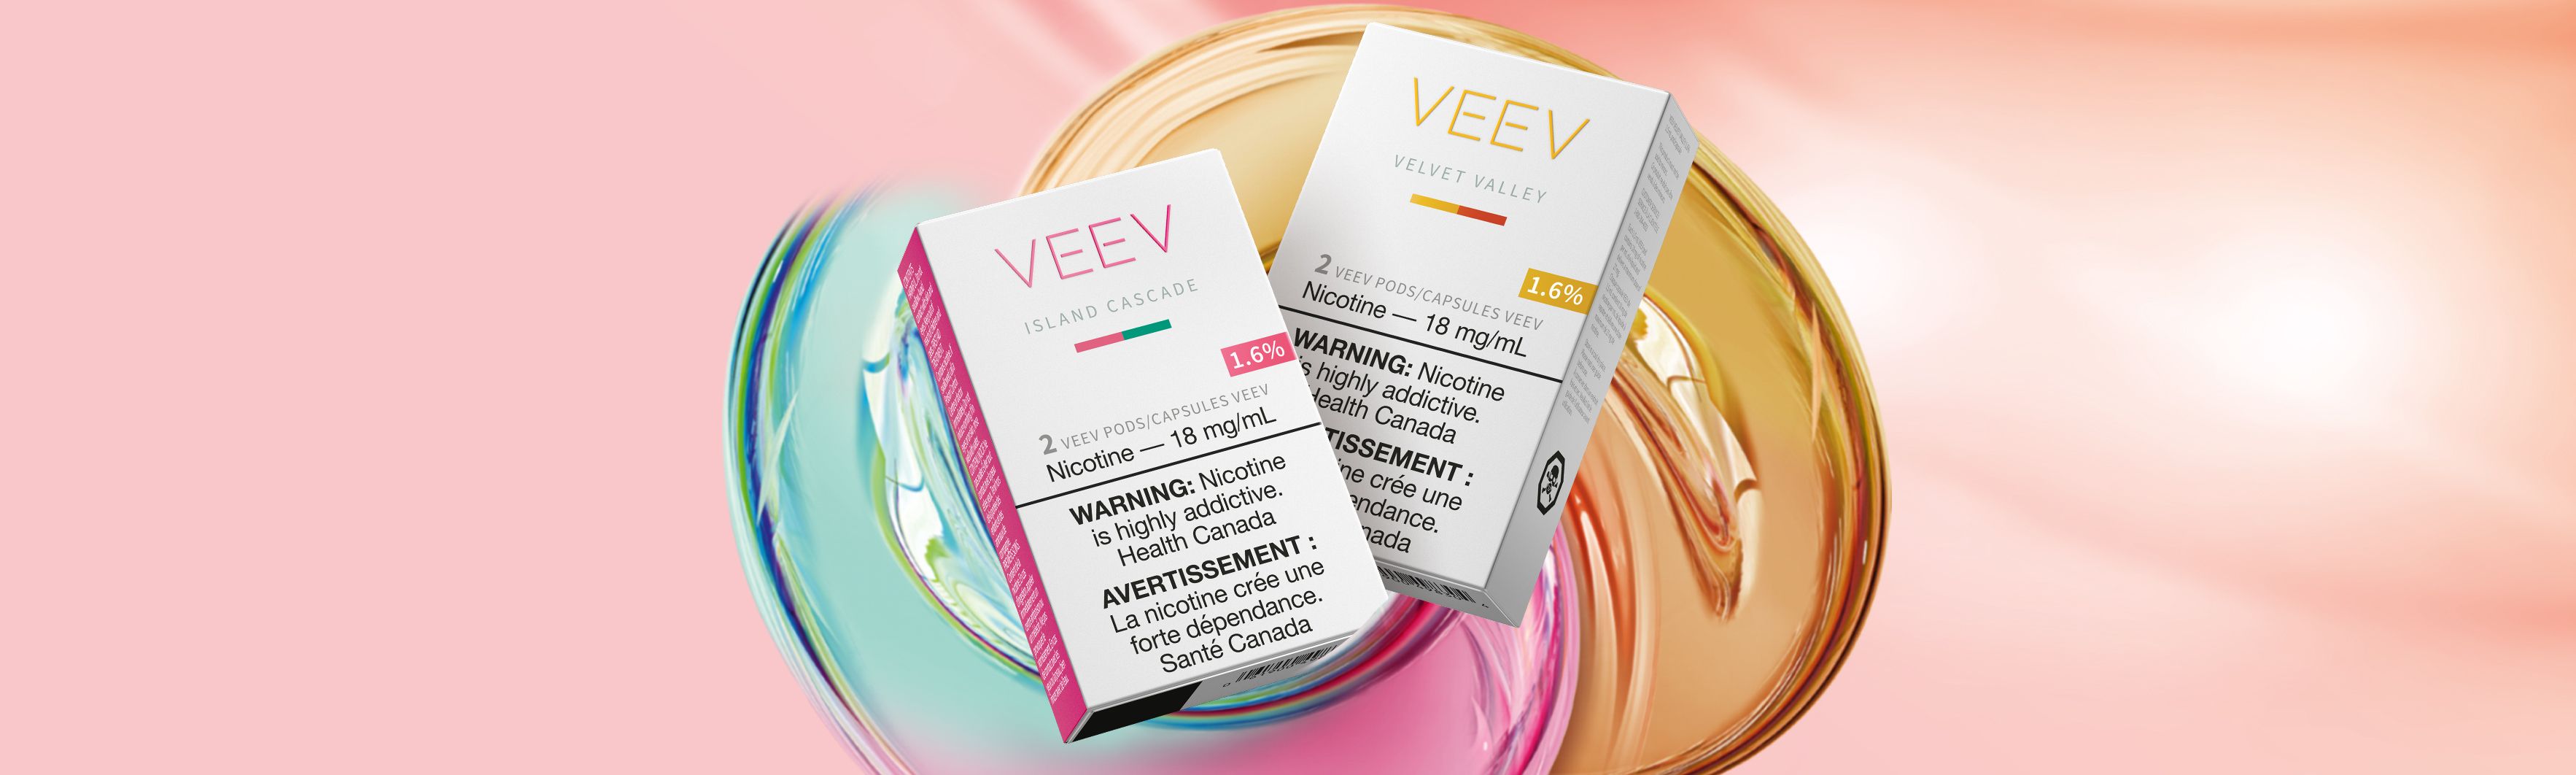 VEEV introduces two new flavours—with a twist